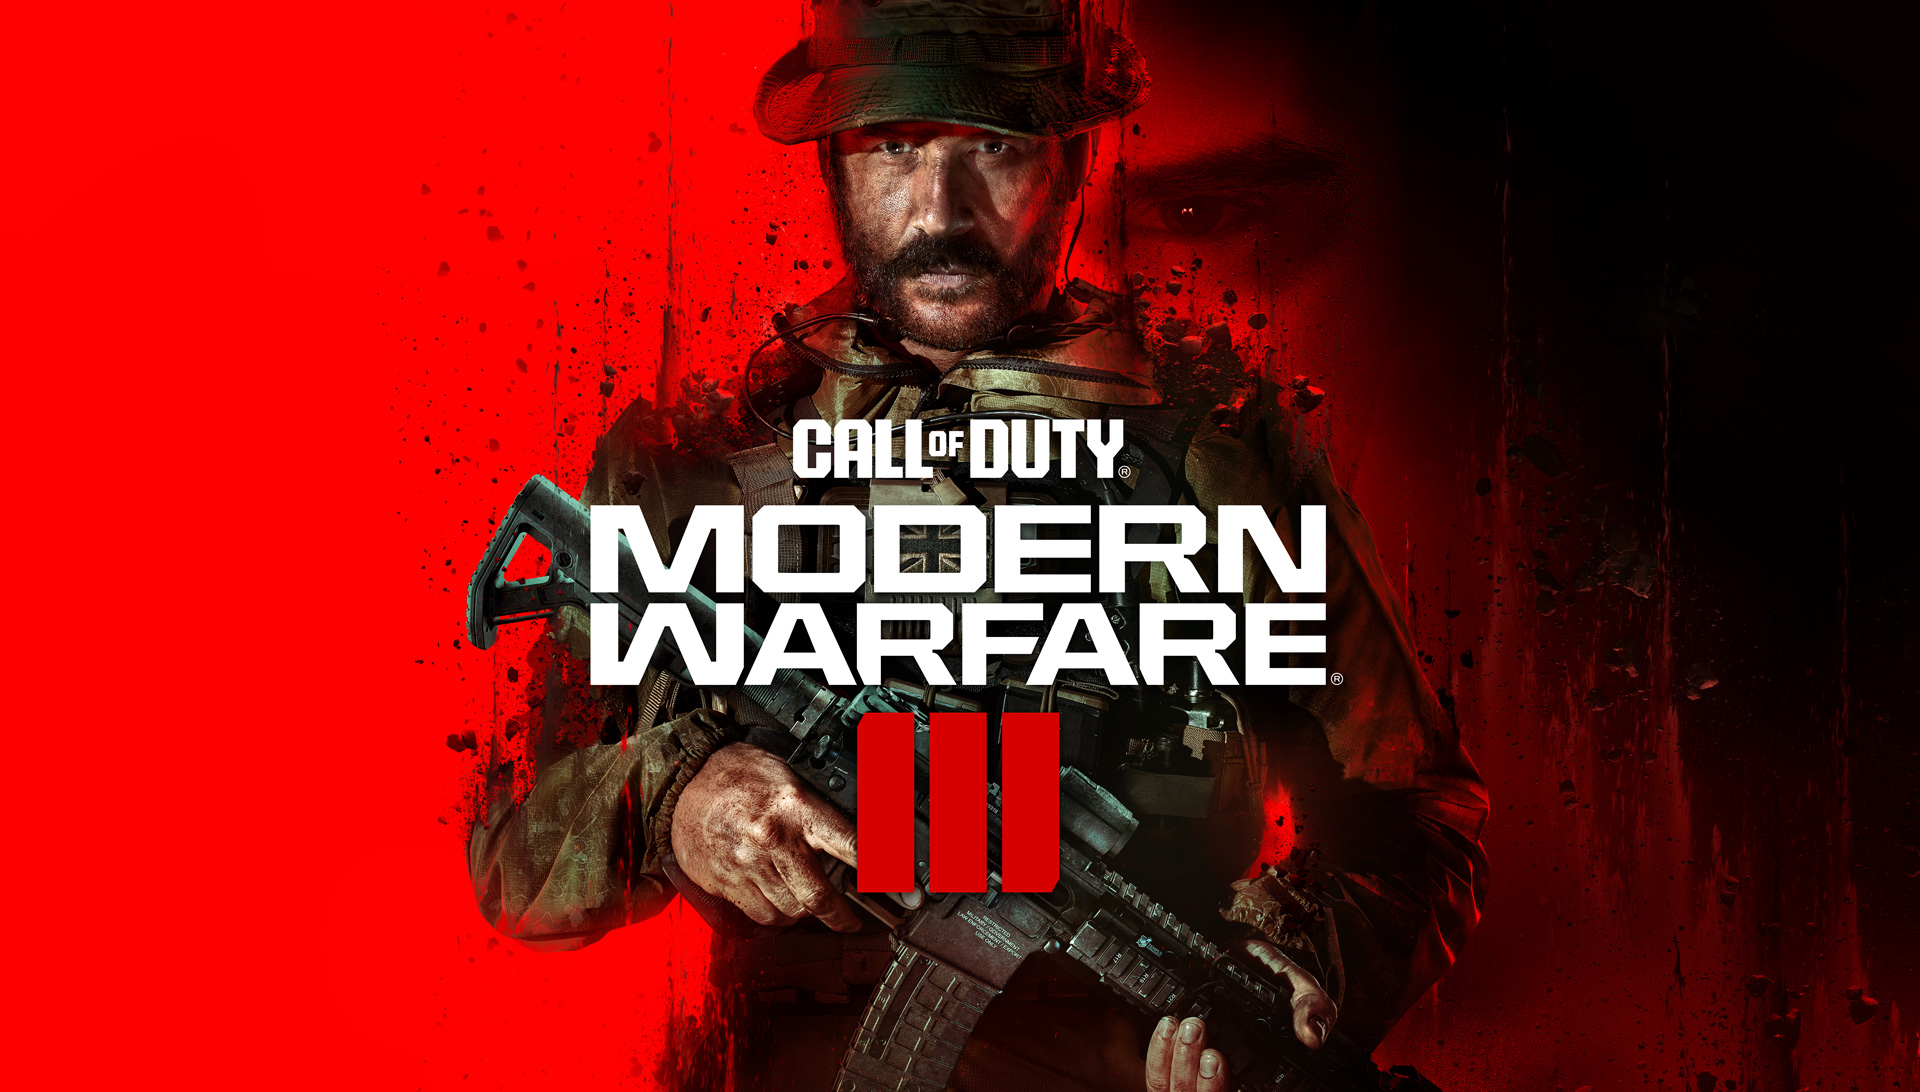 Call of Duty beta Twitch drops revealed for Modern Warfare 3 and